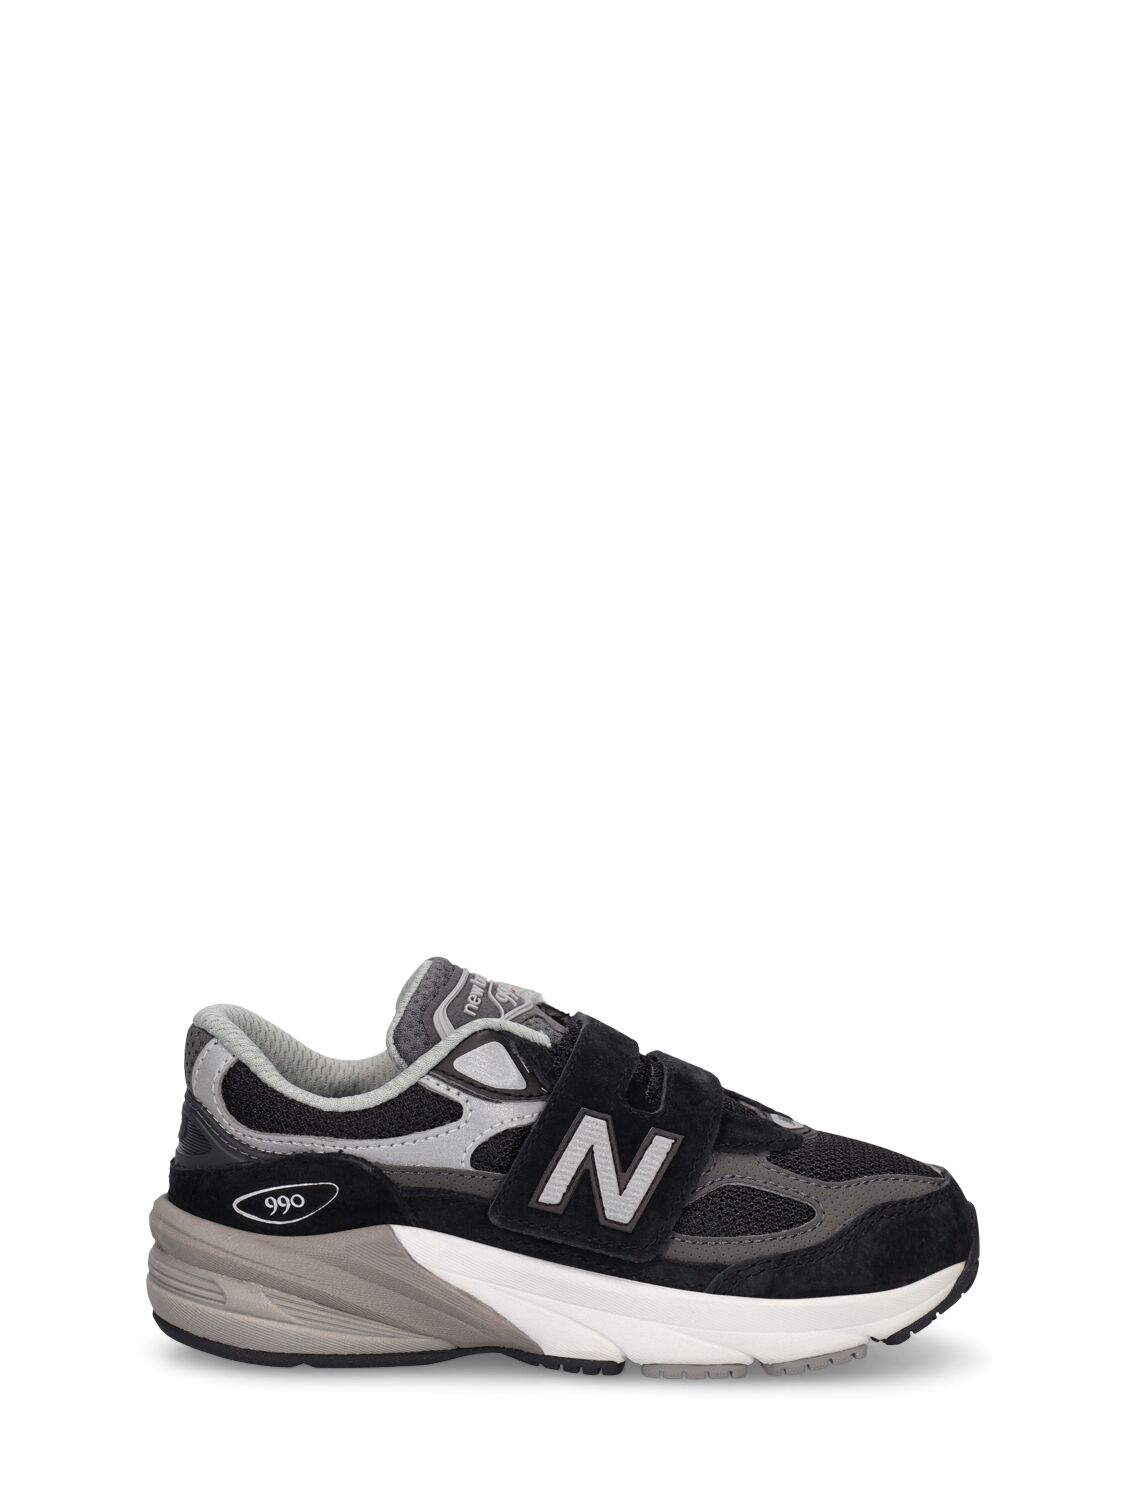 Image of 990 V6 Leather & Mesh Sneakers